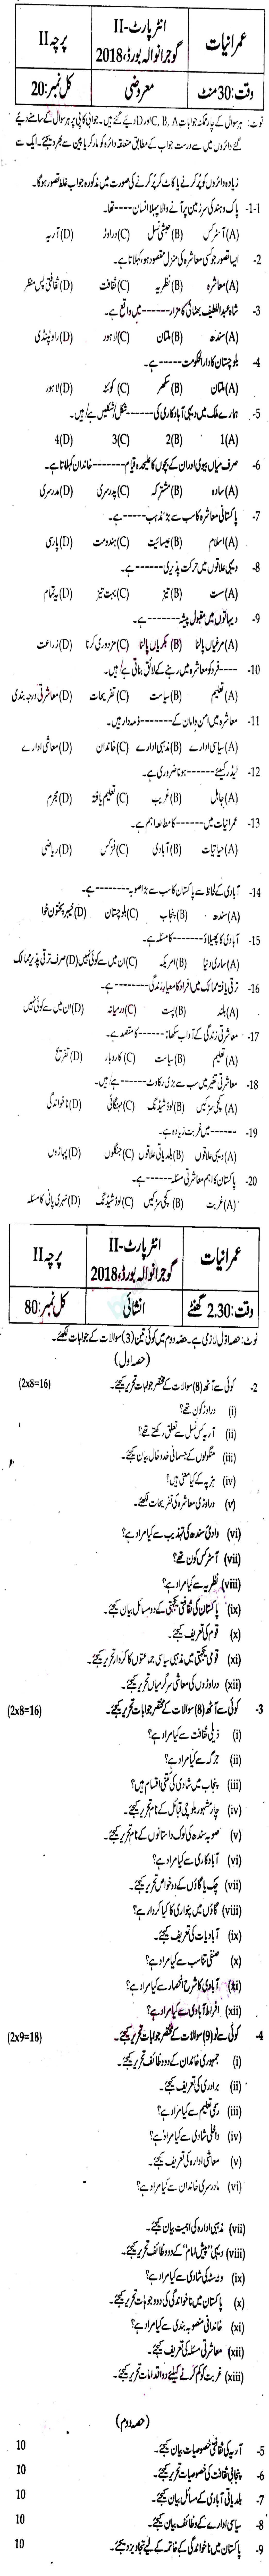 Sociology FA Part 2 Past Paper Group 2 BISE Gujranwala 2018